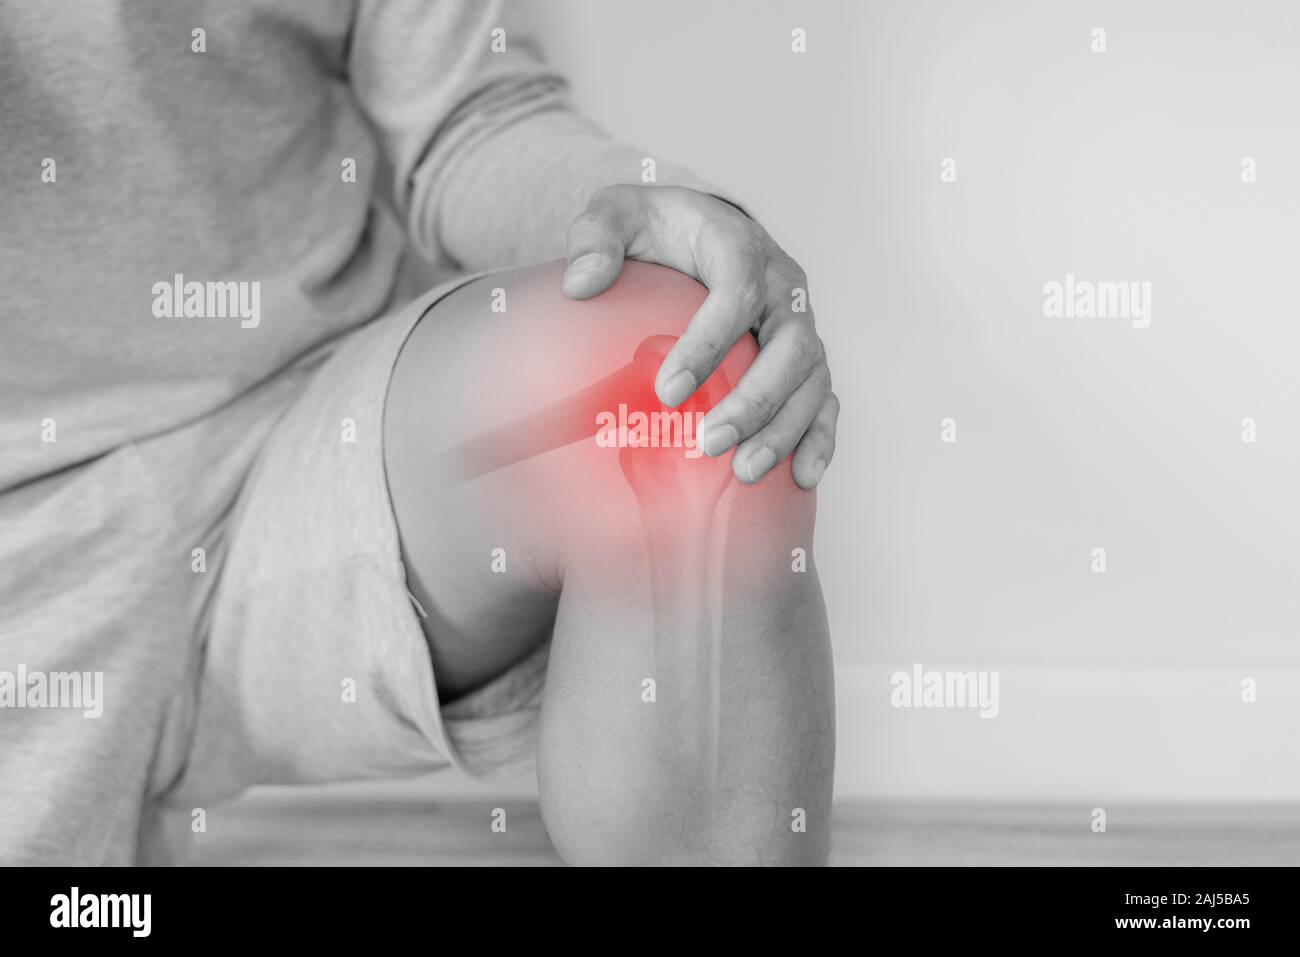 Joint pain, Arthritis and tendon problems. a man touching nee at pain point Stock Photo